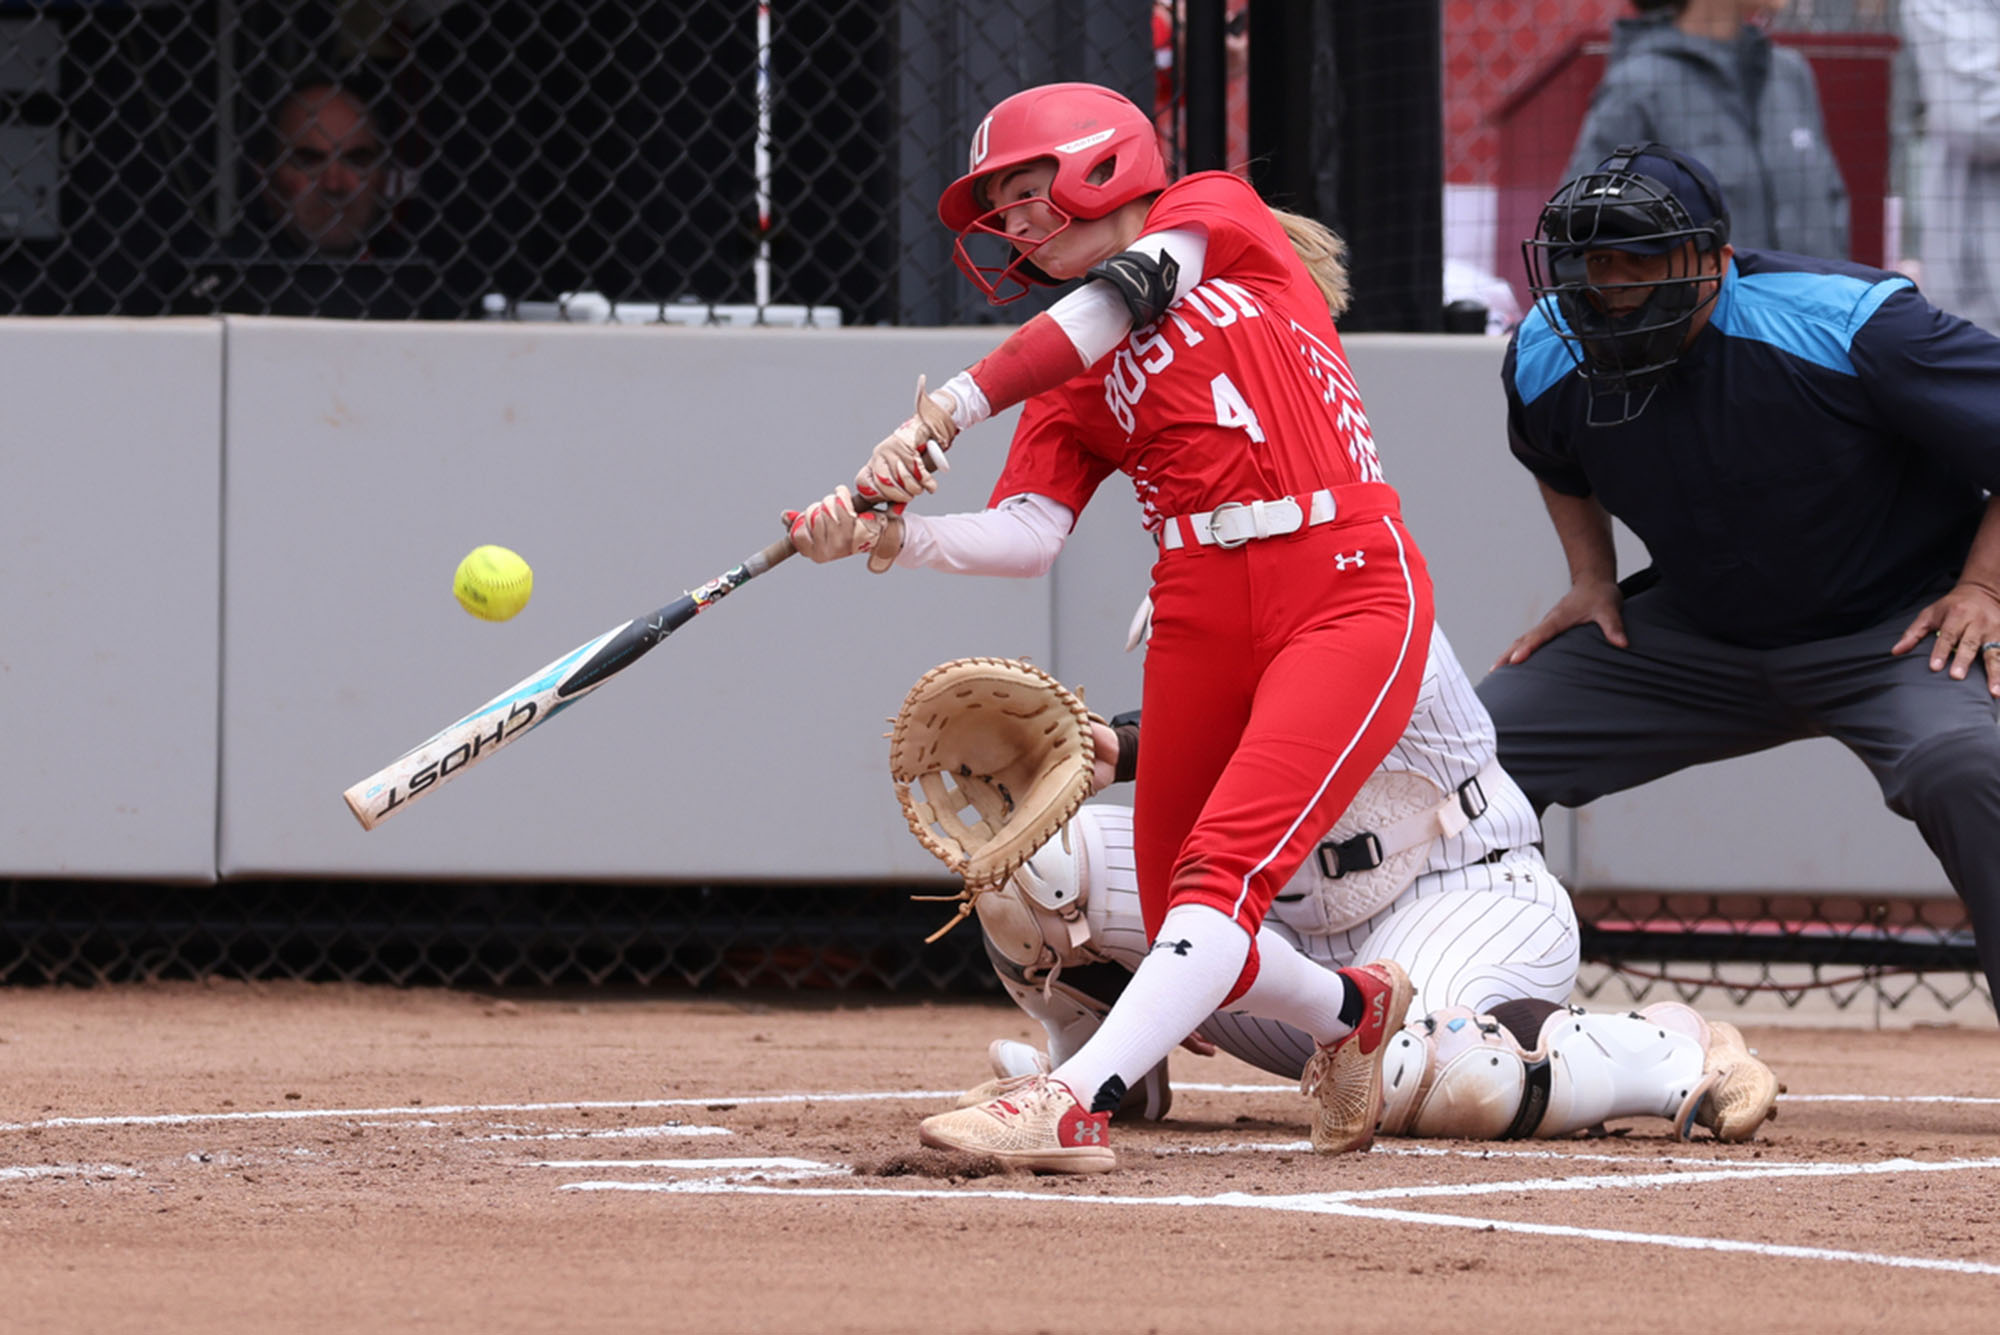 Photo: A picture of a girl in a red softball uniform with white accents up at bat